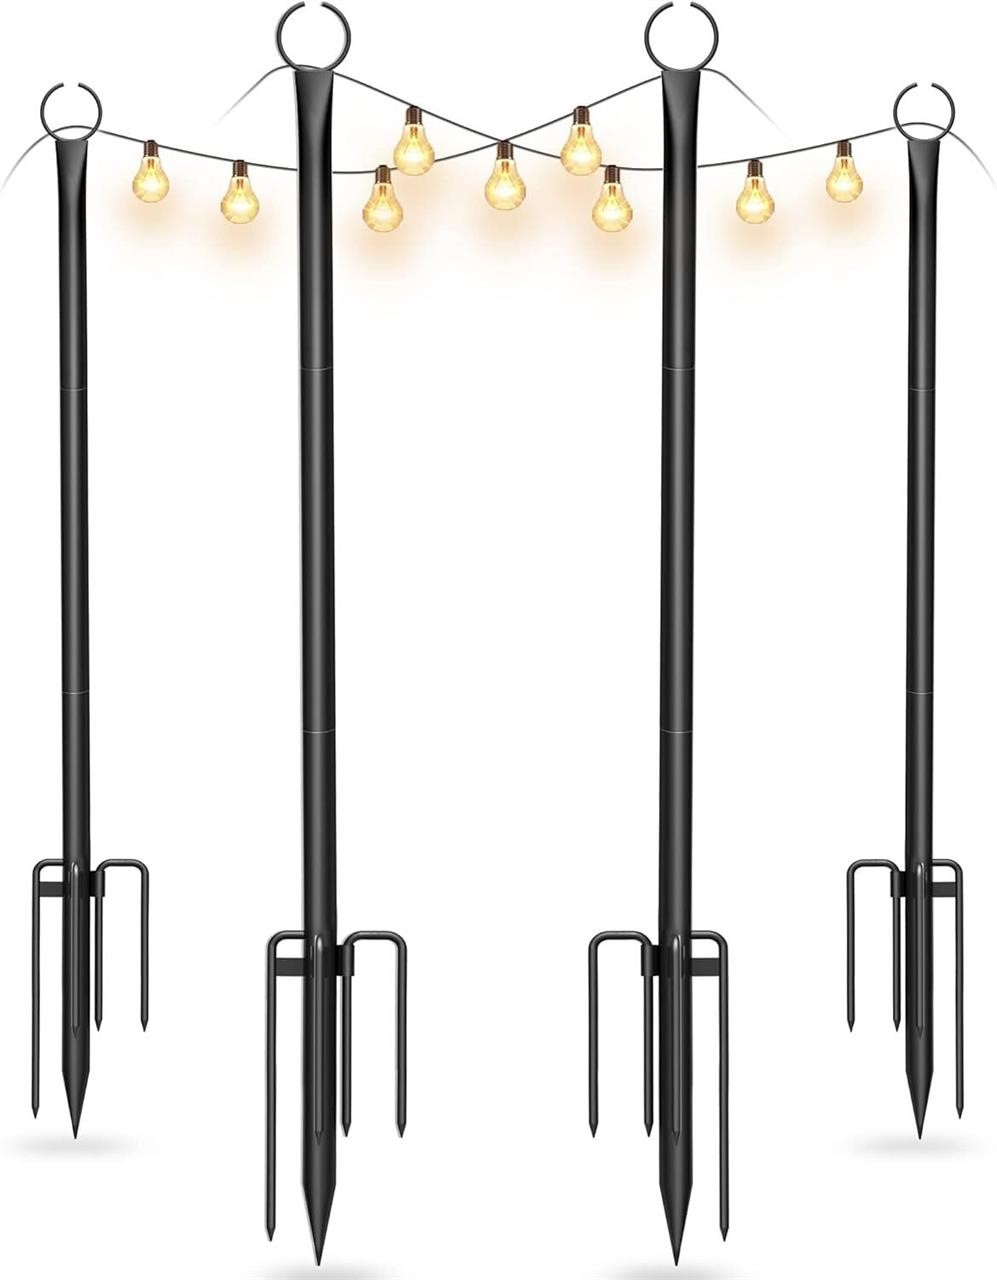 aneeway String Light Poles for Outside  8.9ft